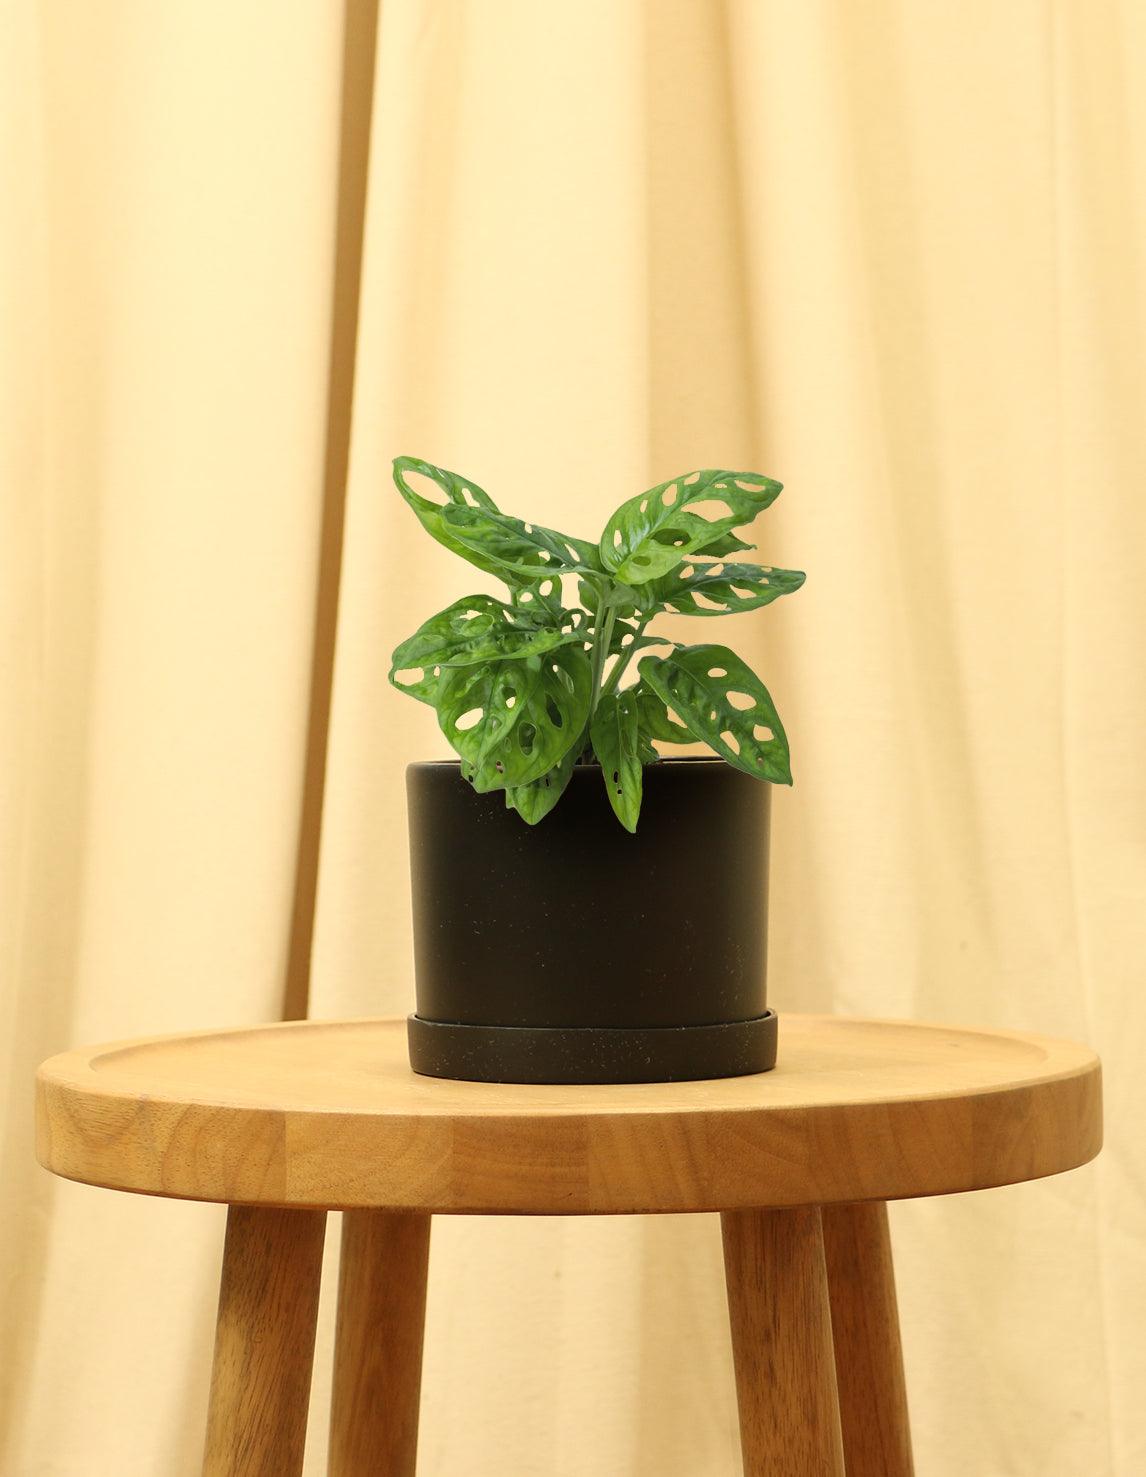 Small Swiss Cheese Plant in black pot.